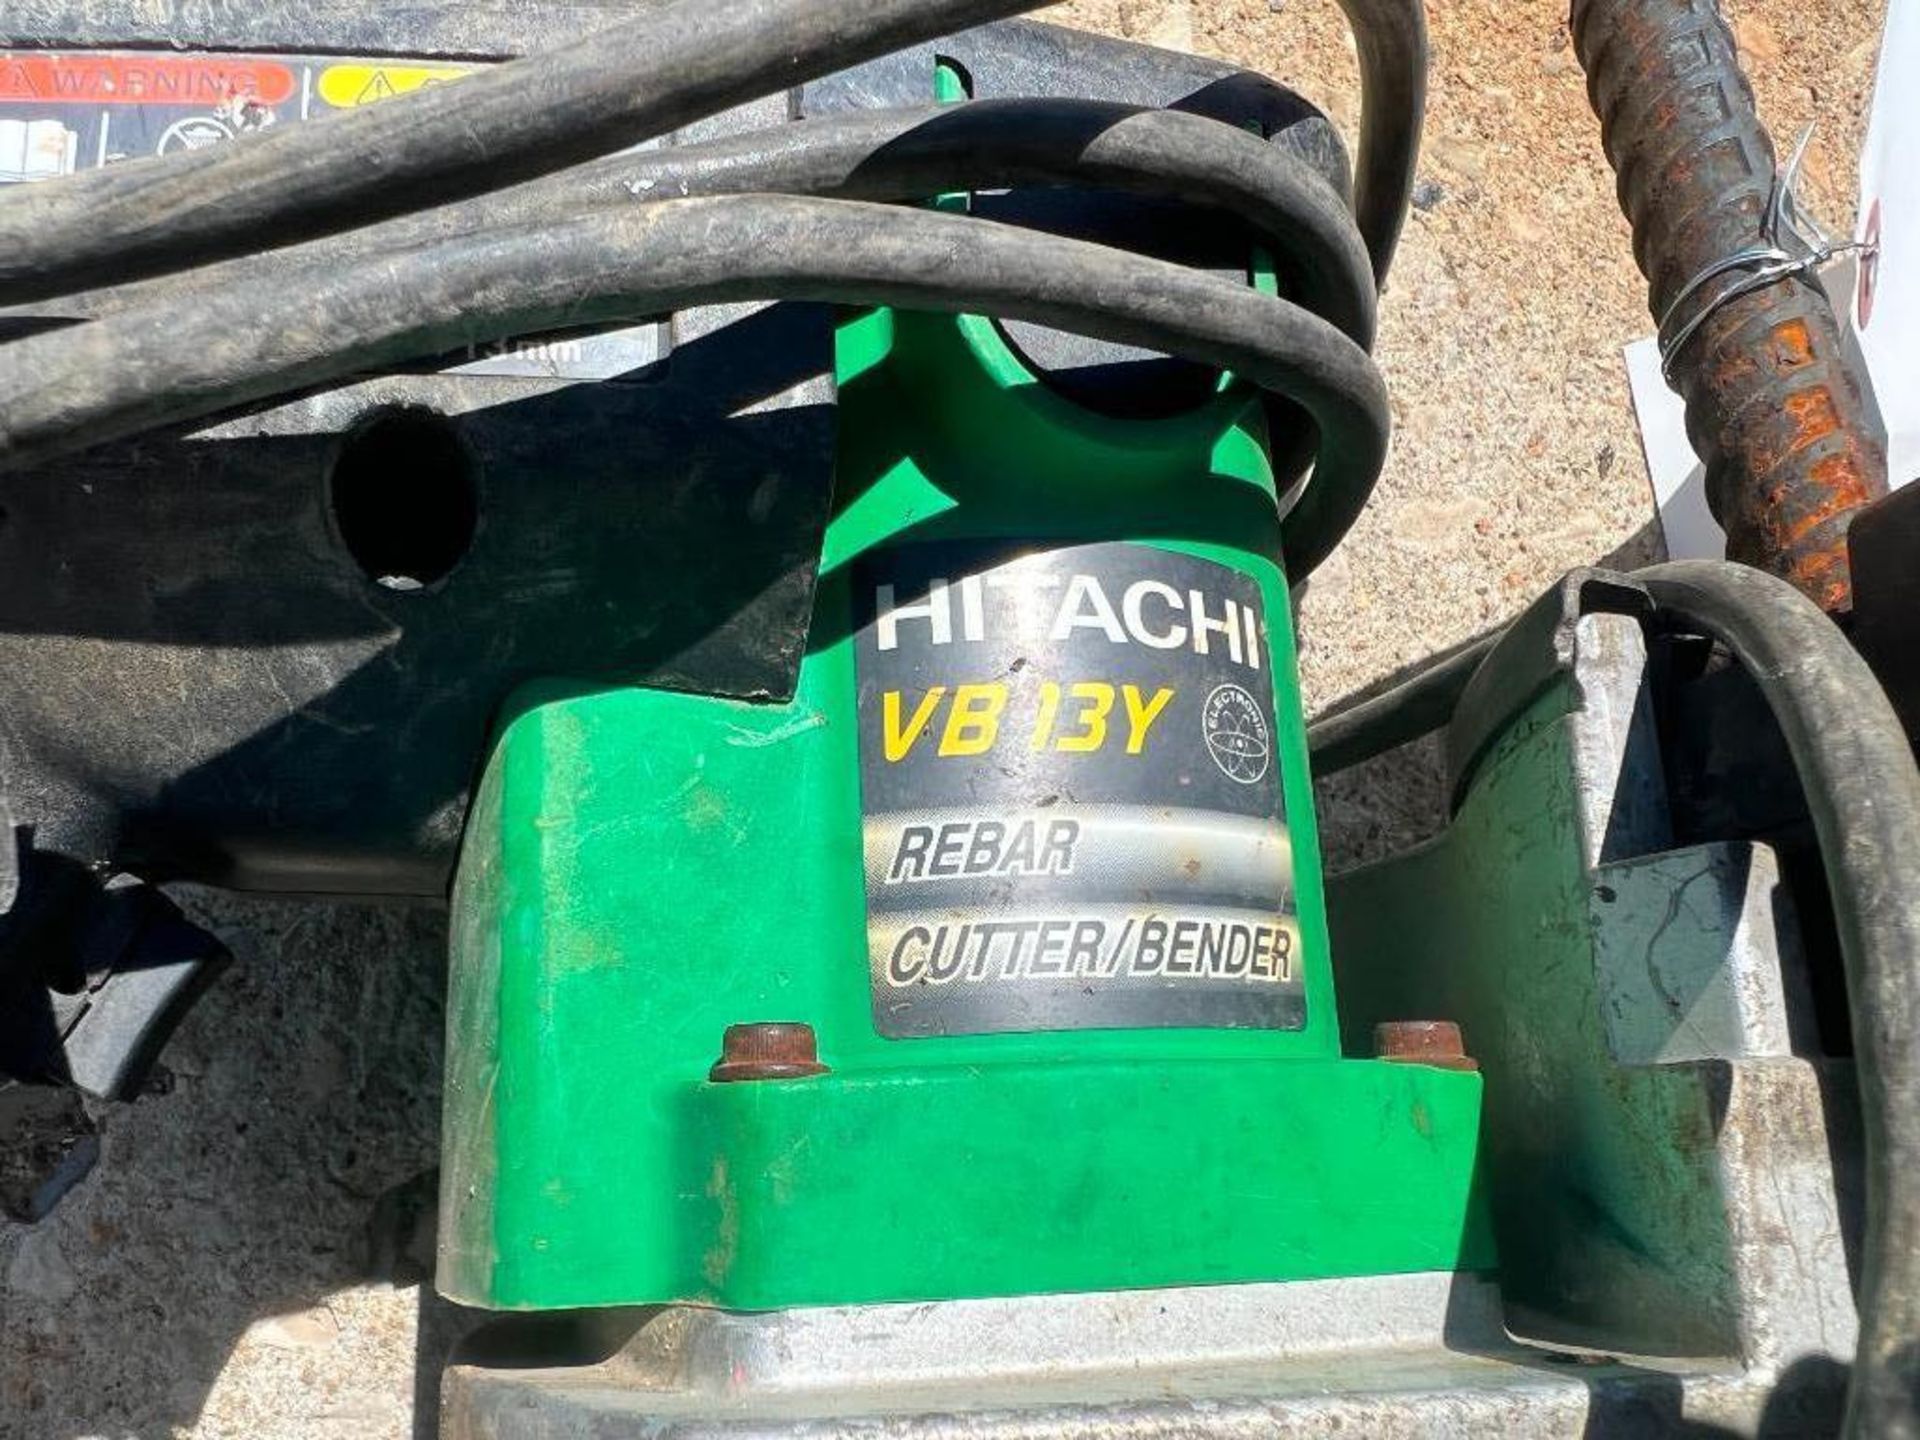 Hitachi VB13Y 1/2 Inch Rebar Cutter/Bender. Located in Mt. Pleasant, IA - Image 3 of 4